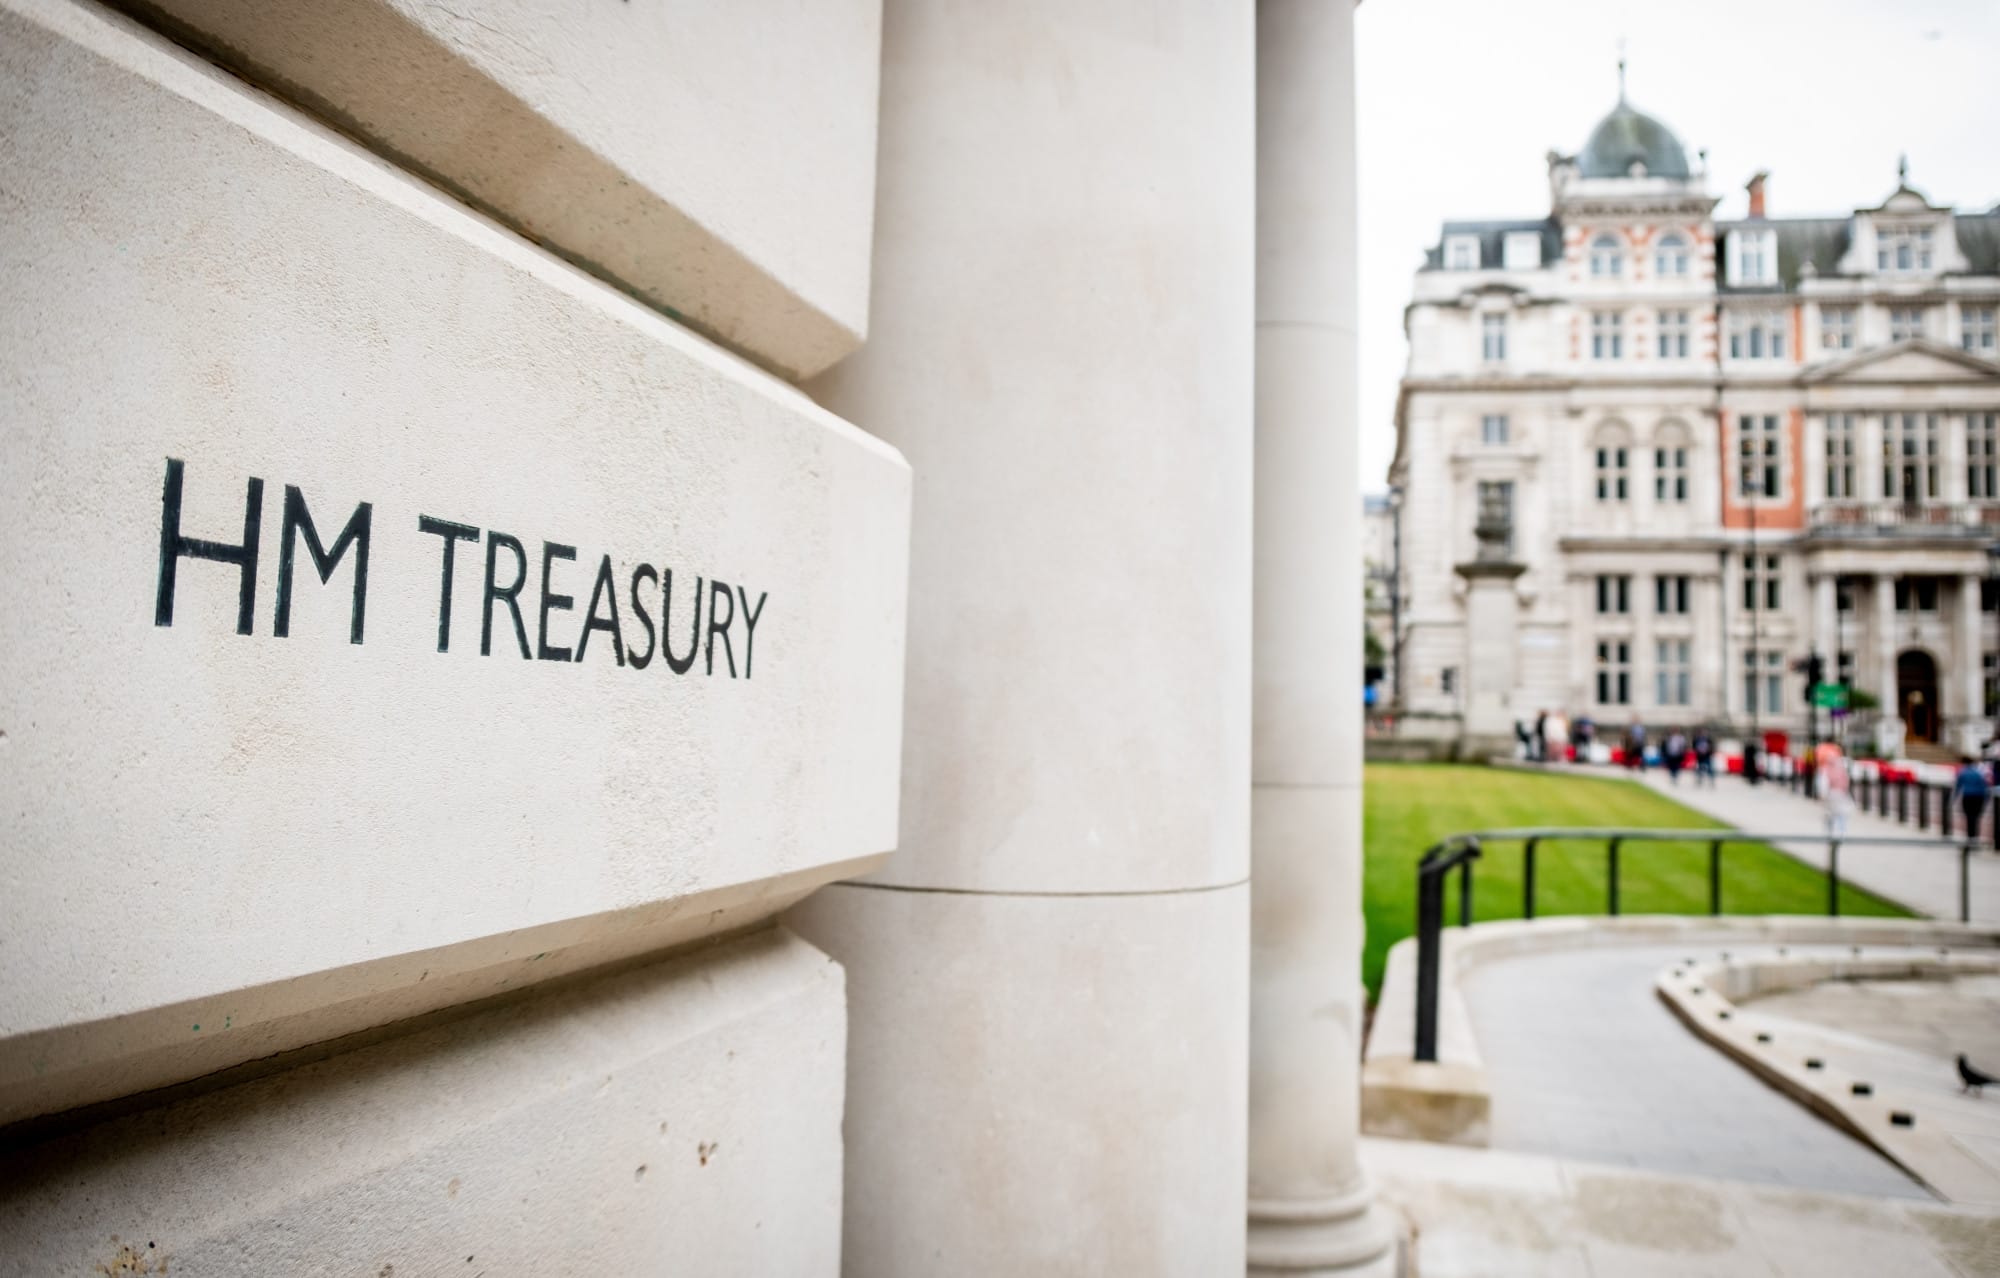 Autumn Statement 2023: This image shows the entrance to HM Treasury in Whitehall